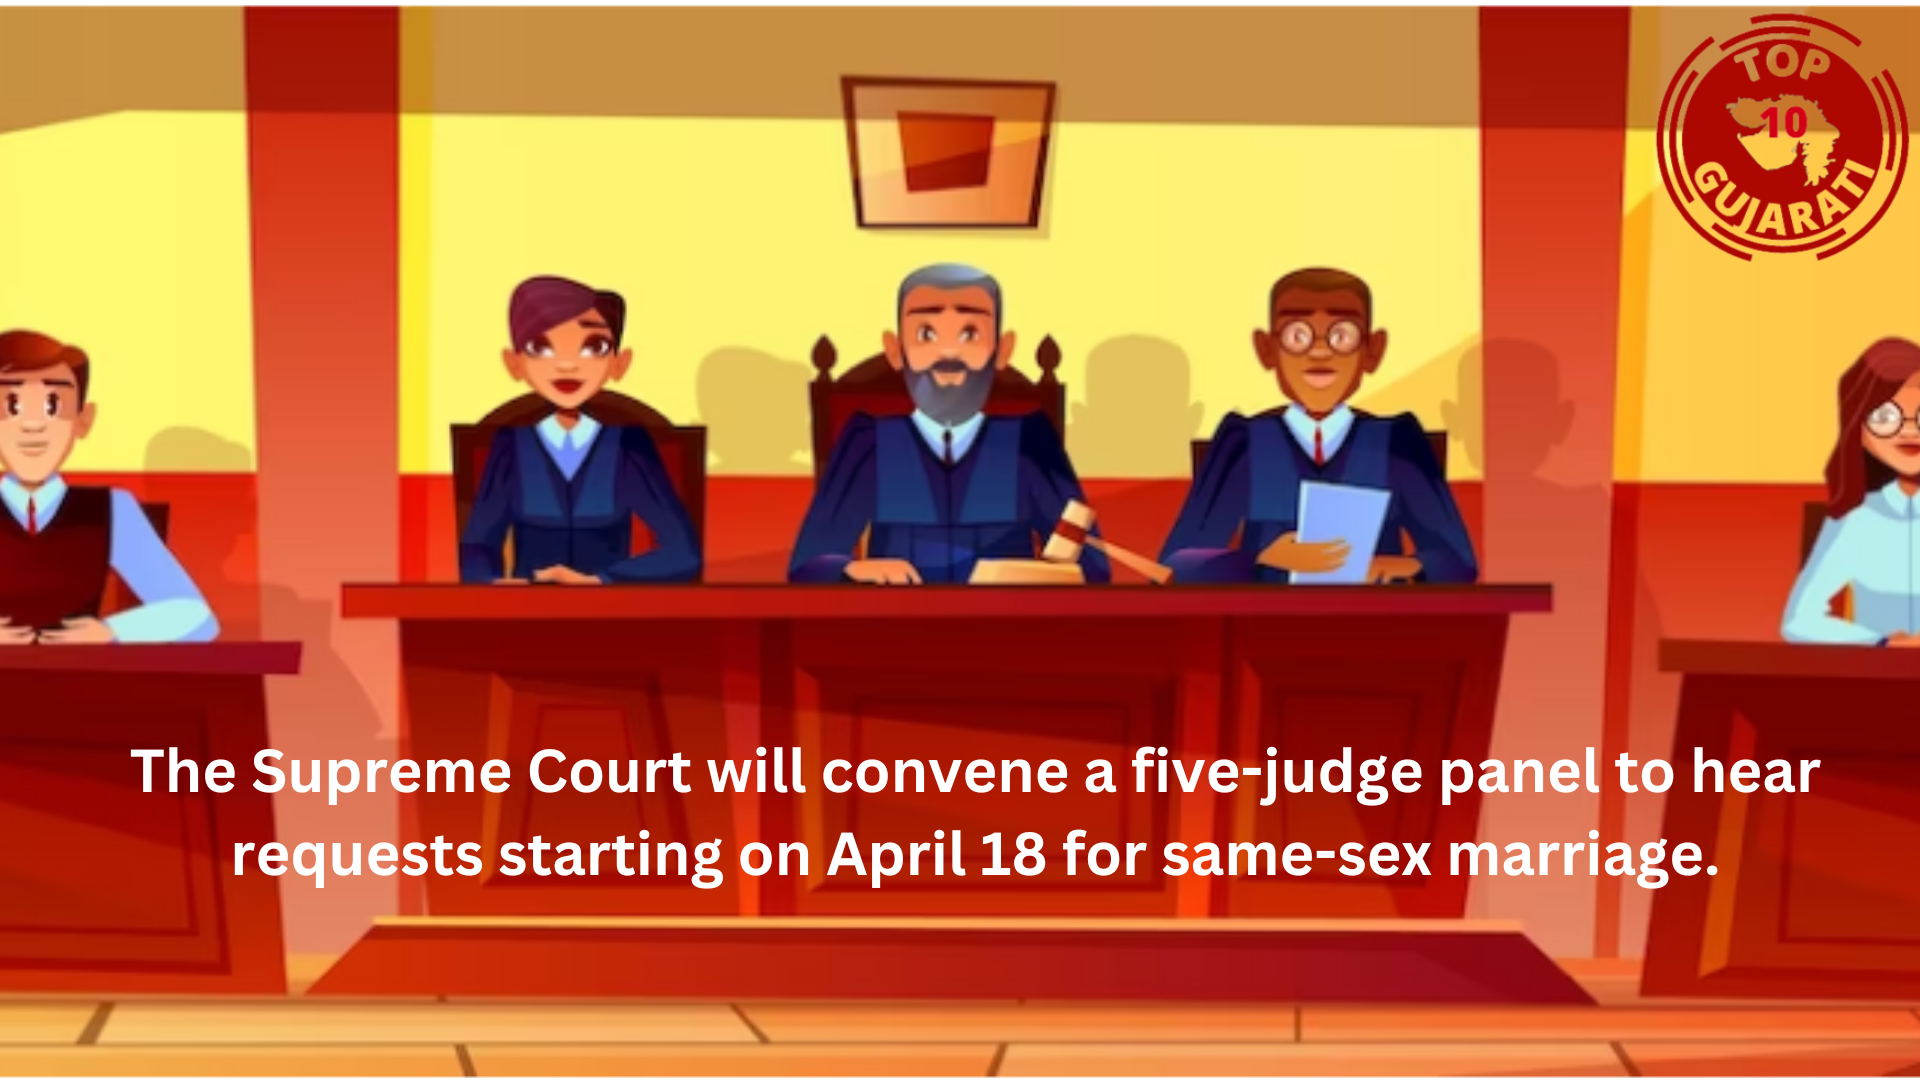 Supreme Court will convene a five-judge panel to hear requests starting on April 18 for same-sex marriage.